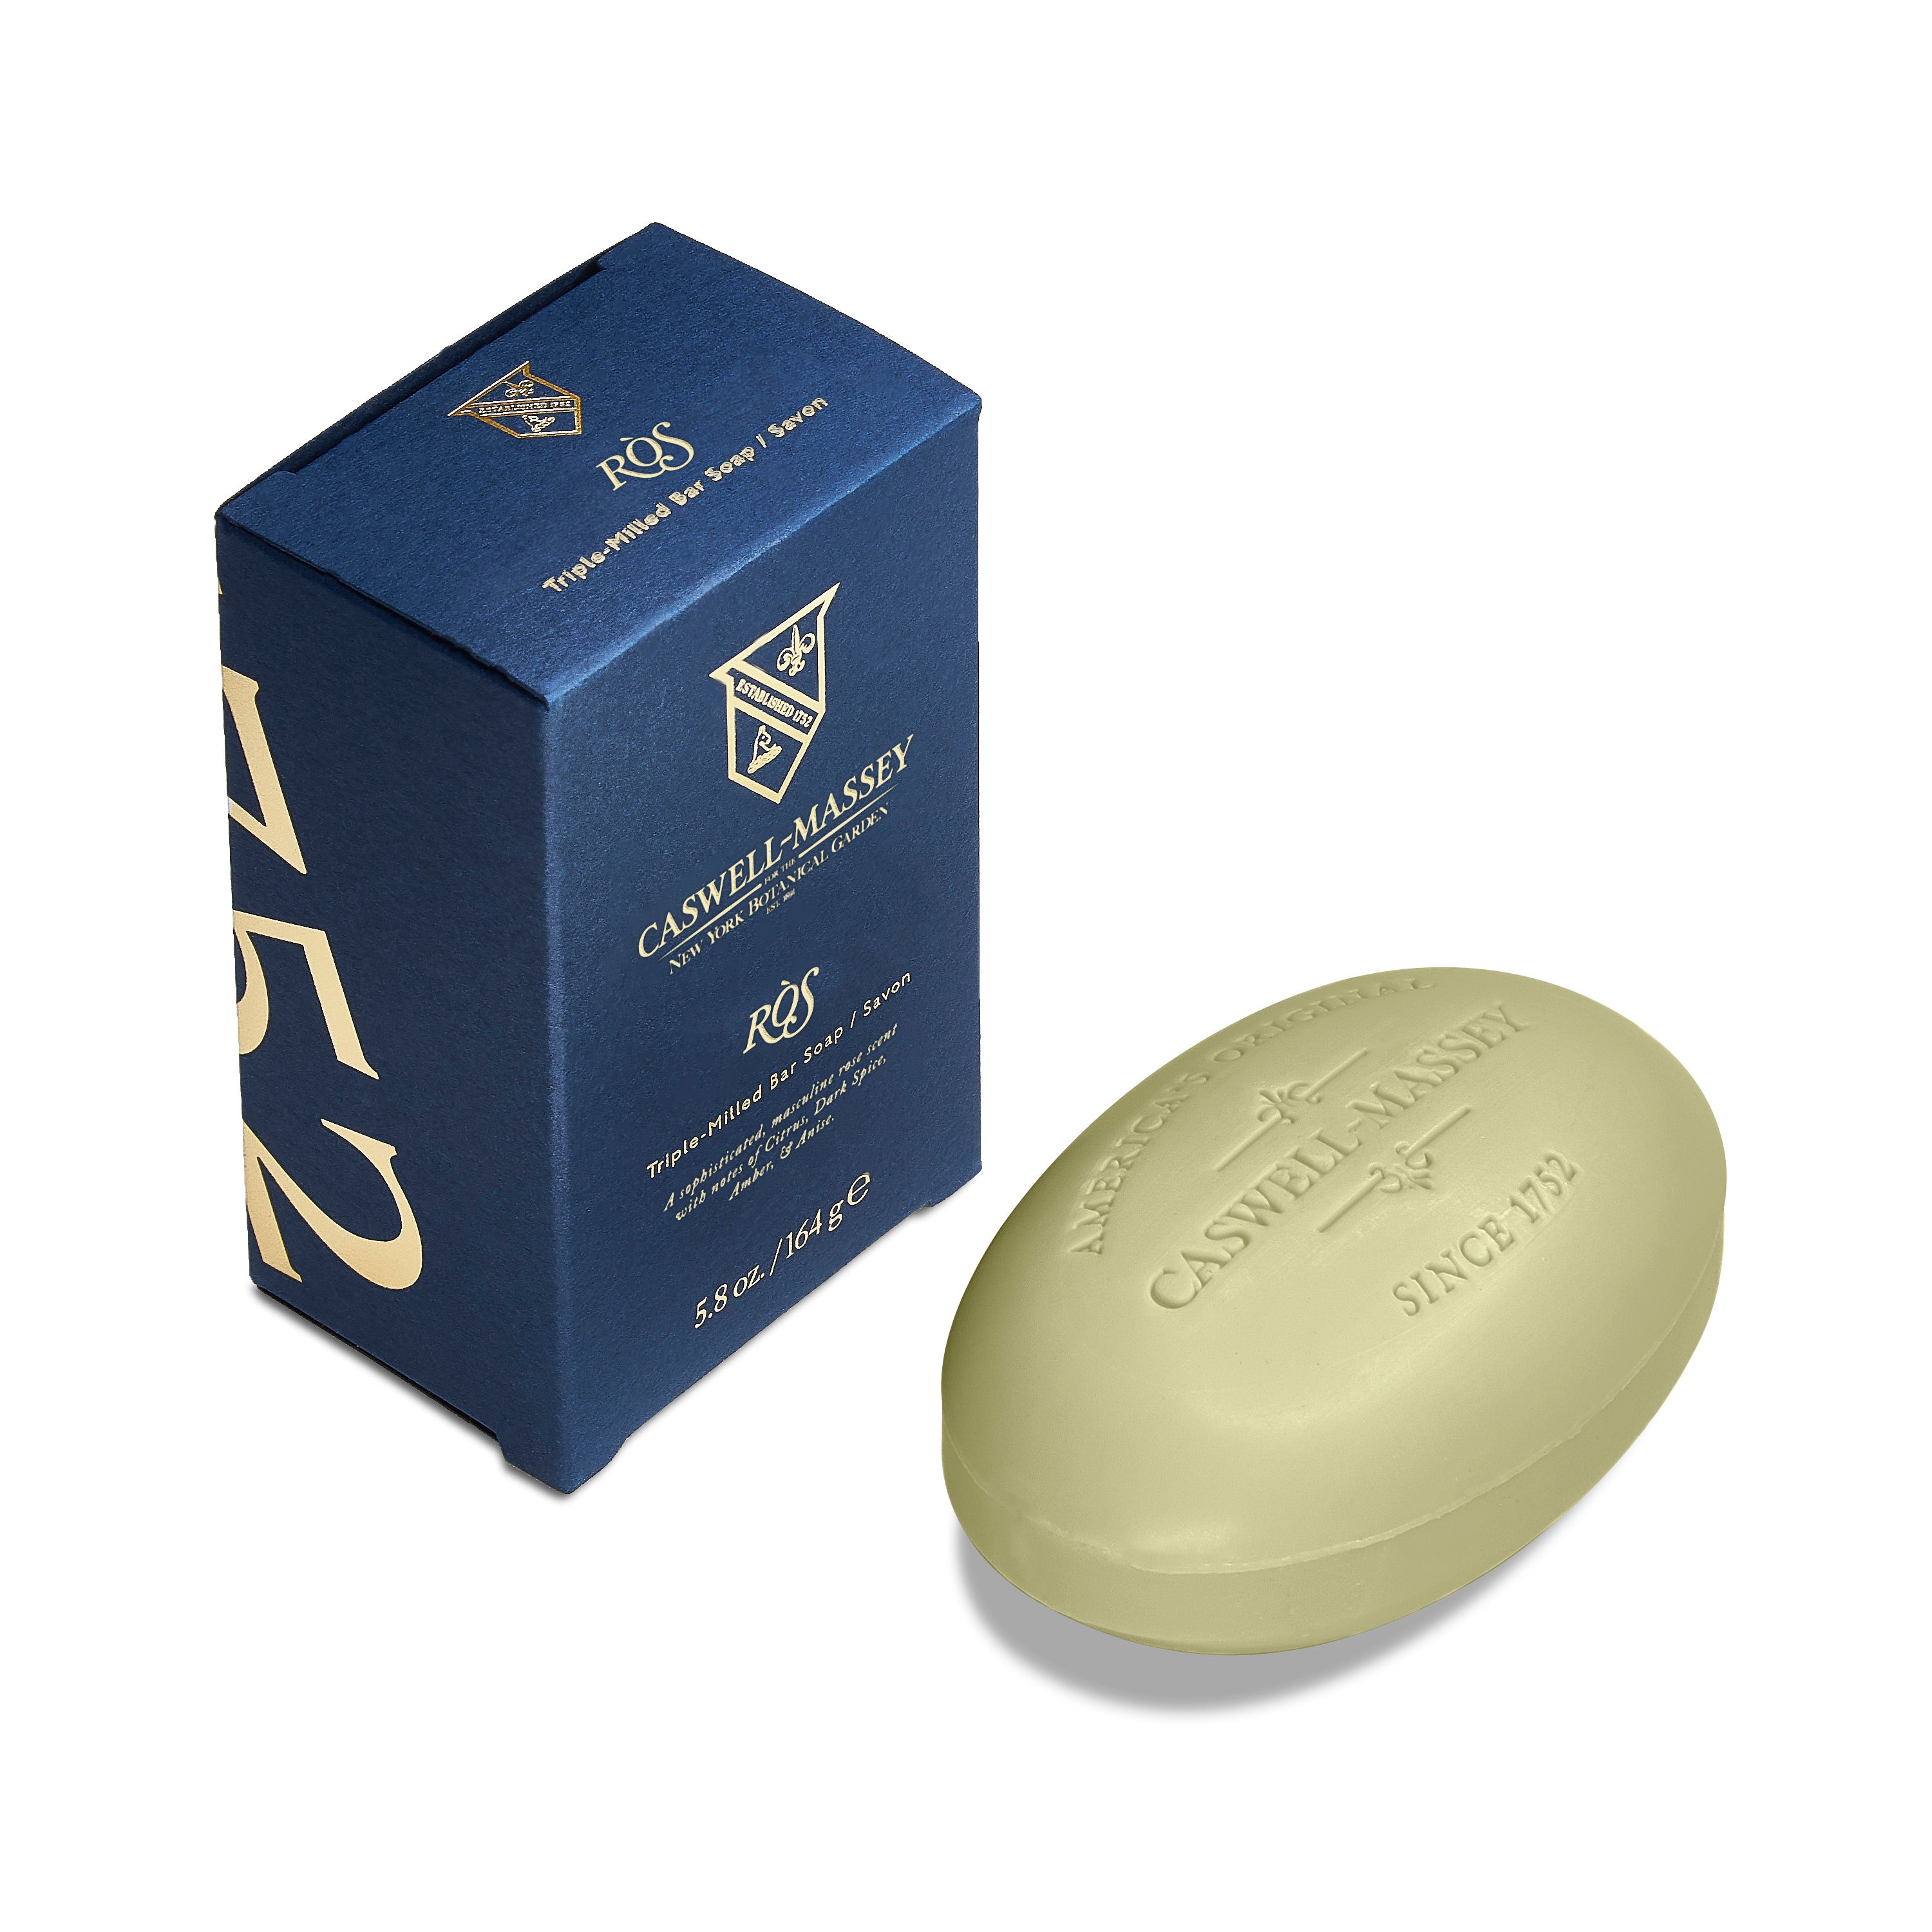 Caswell-Massey RÒS Bar Soap, green bar soap shown with navy blue box